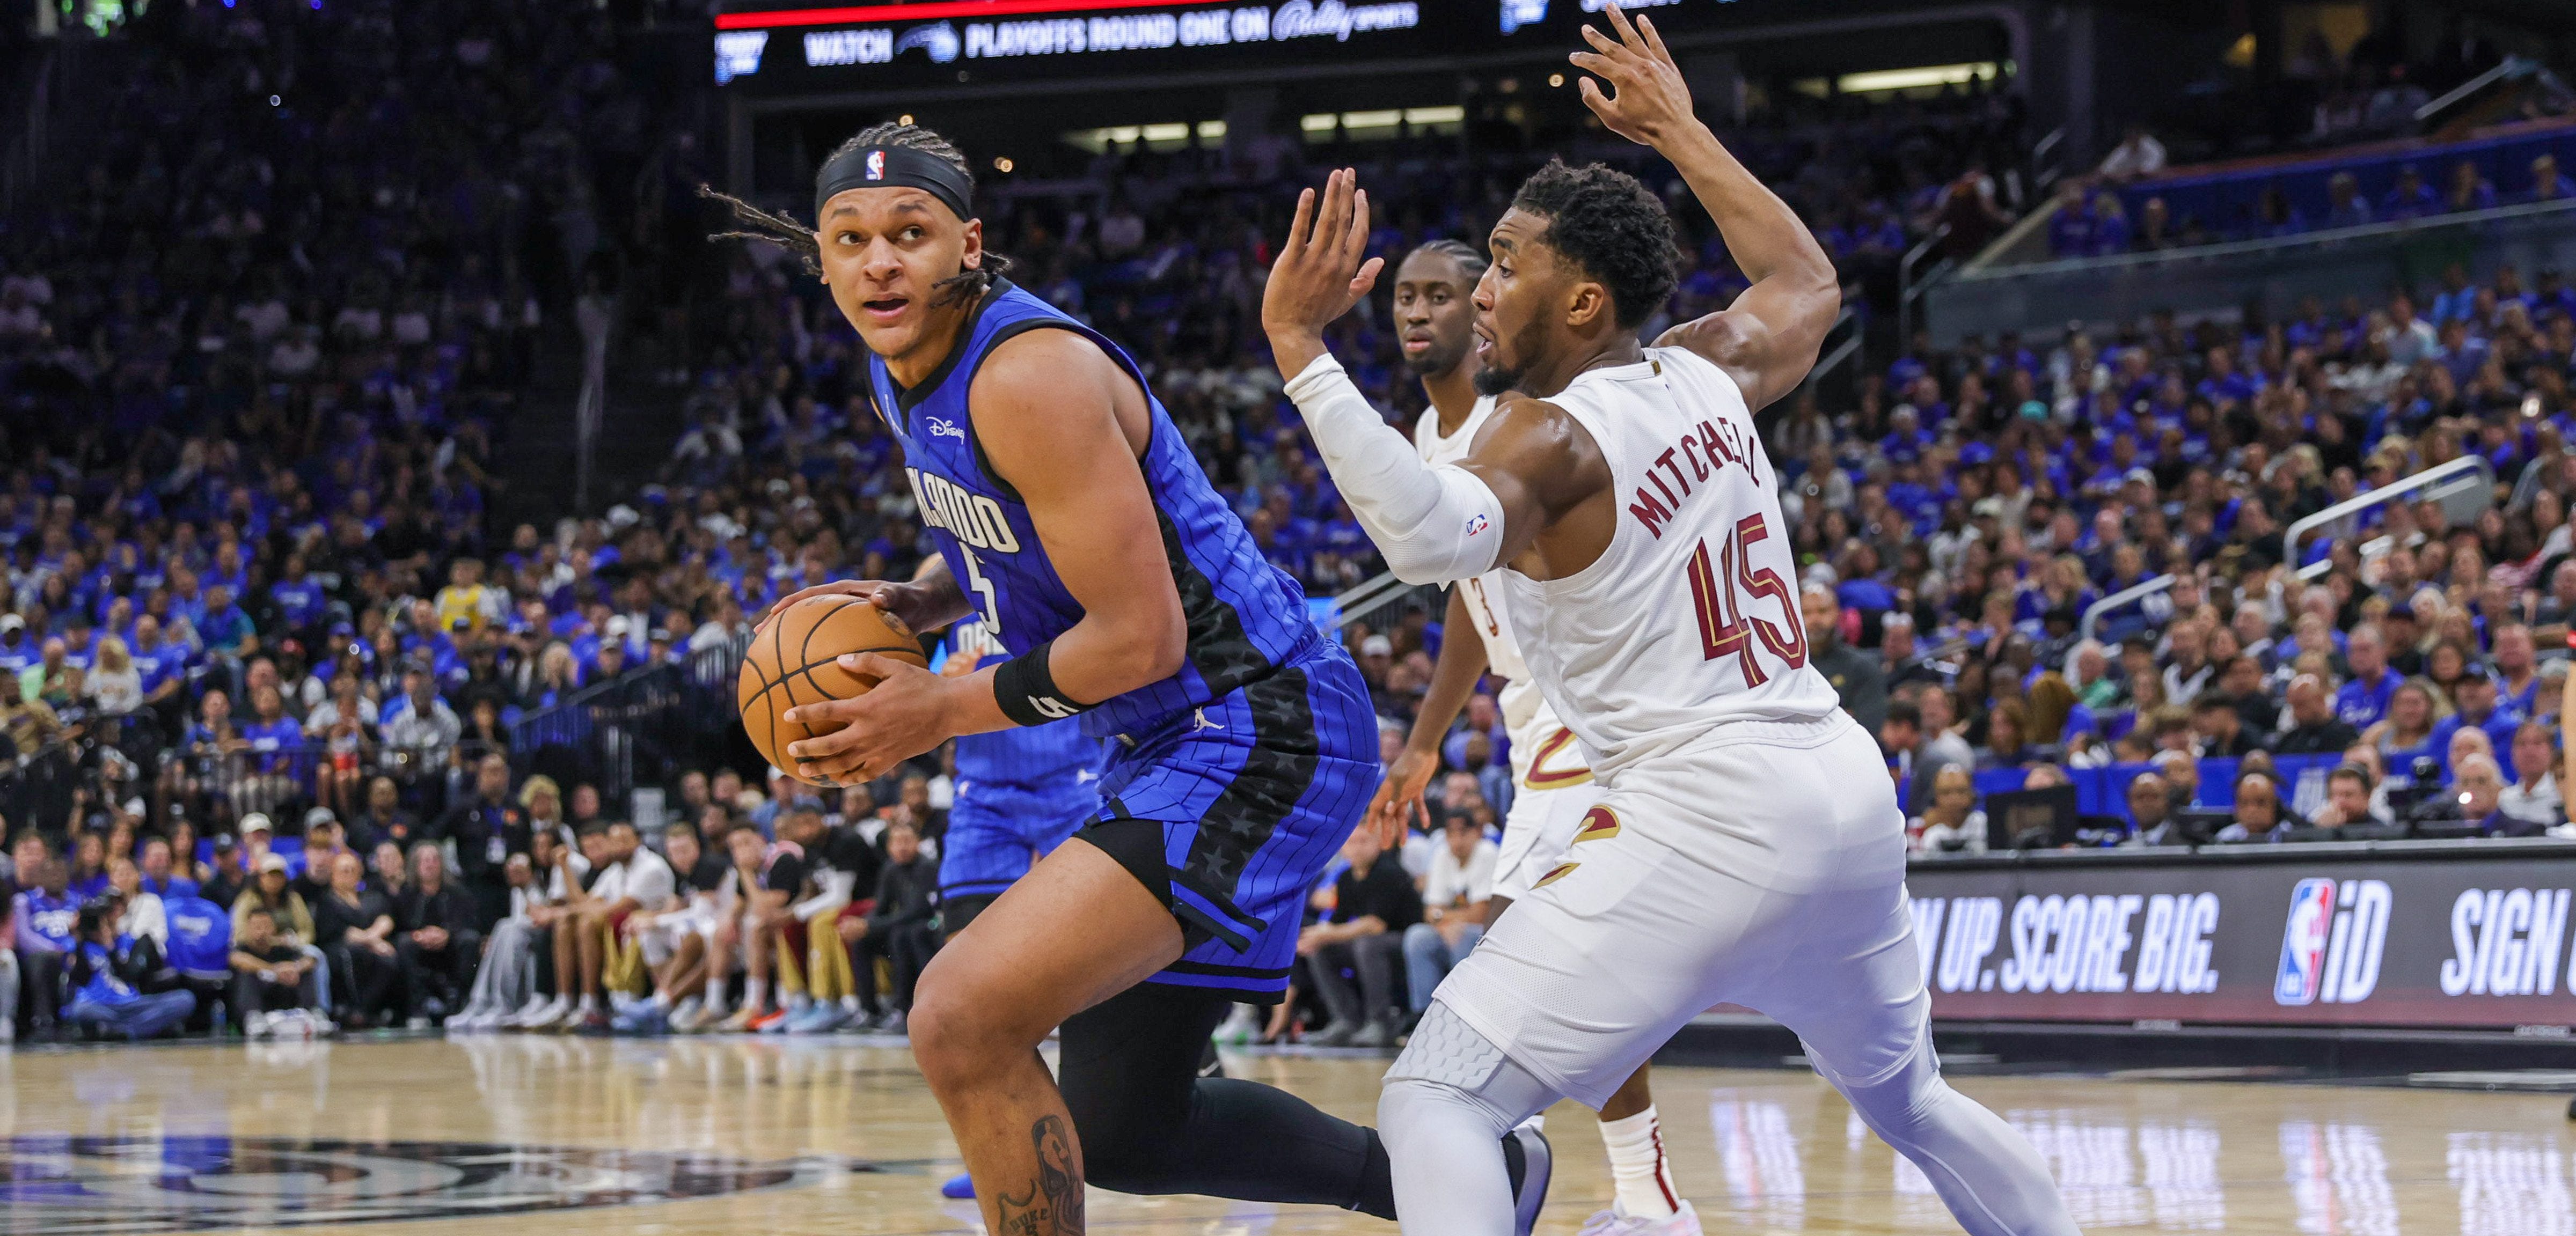 cleveland cavaliers at orlando magic game 4 odds, picks and predictions